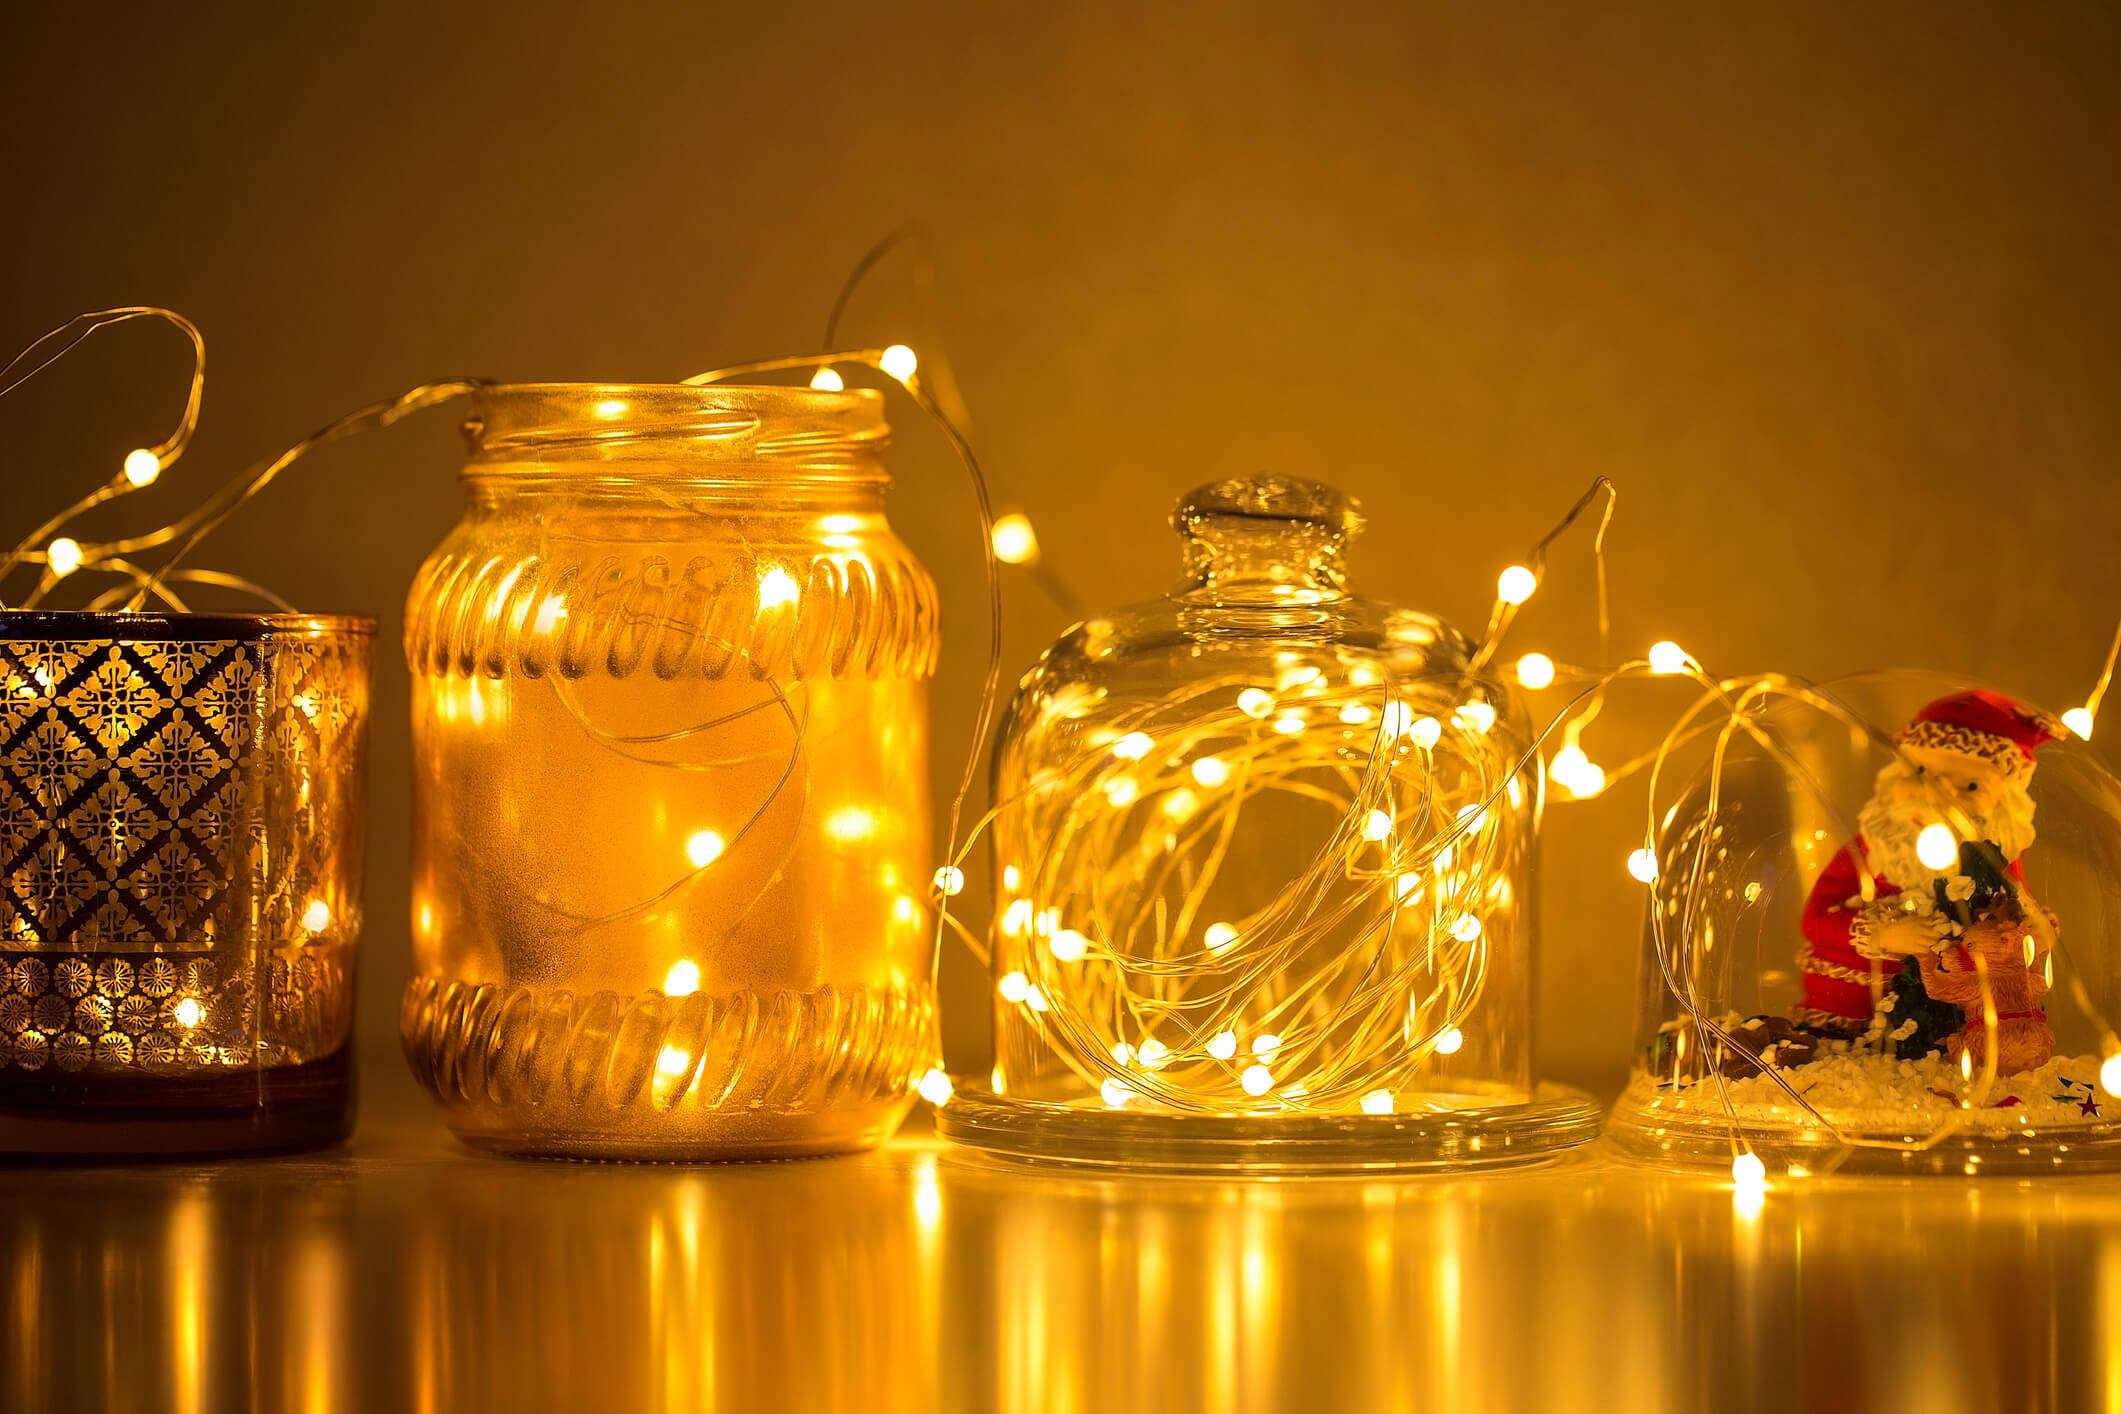 recycled glass jars filled with wire fairy lights